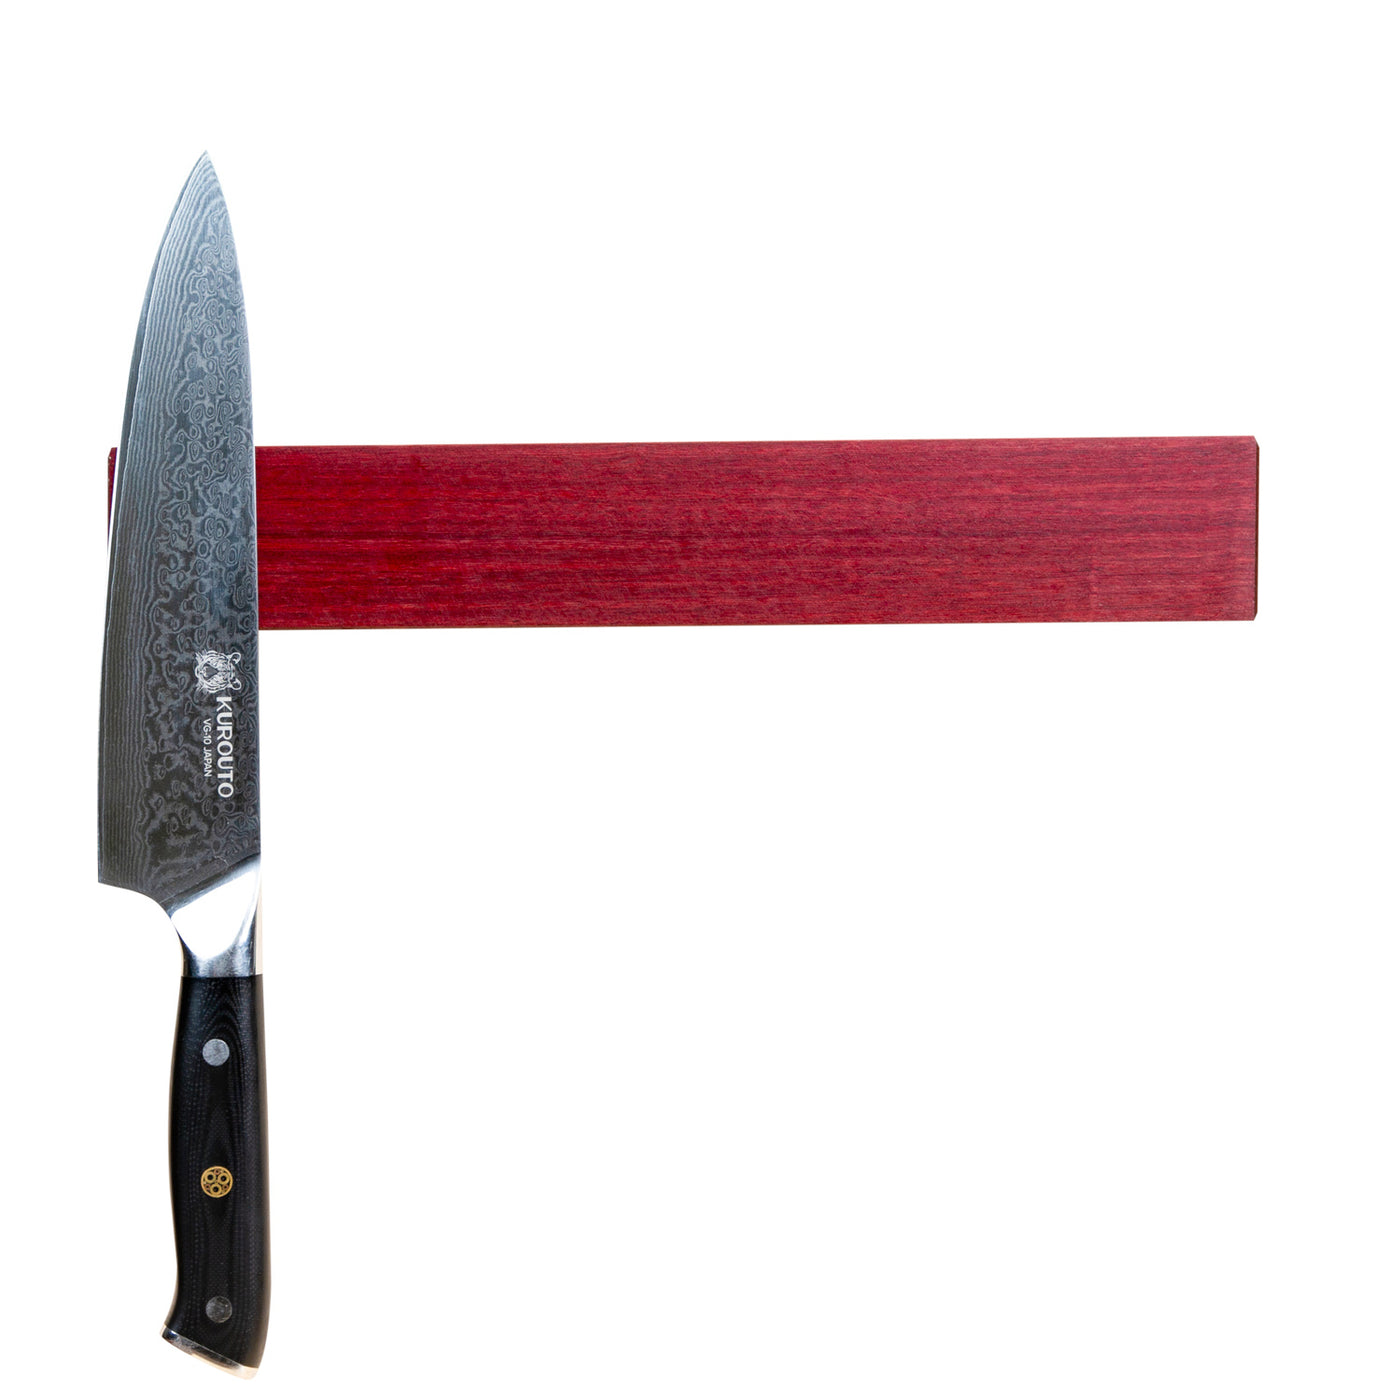 Kurouto Kitchenware Purpleheart Magnetic Knife Block -Made in the USA